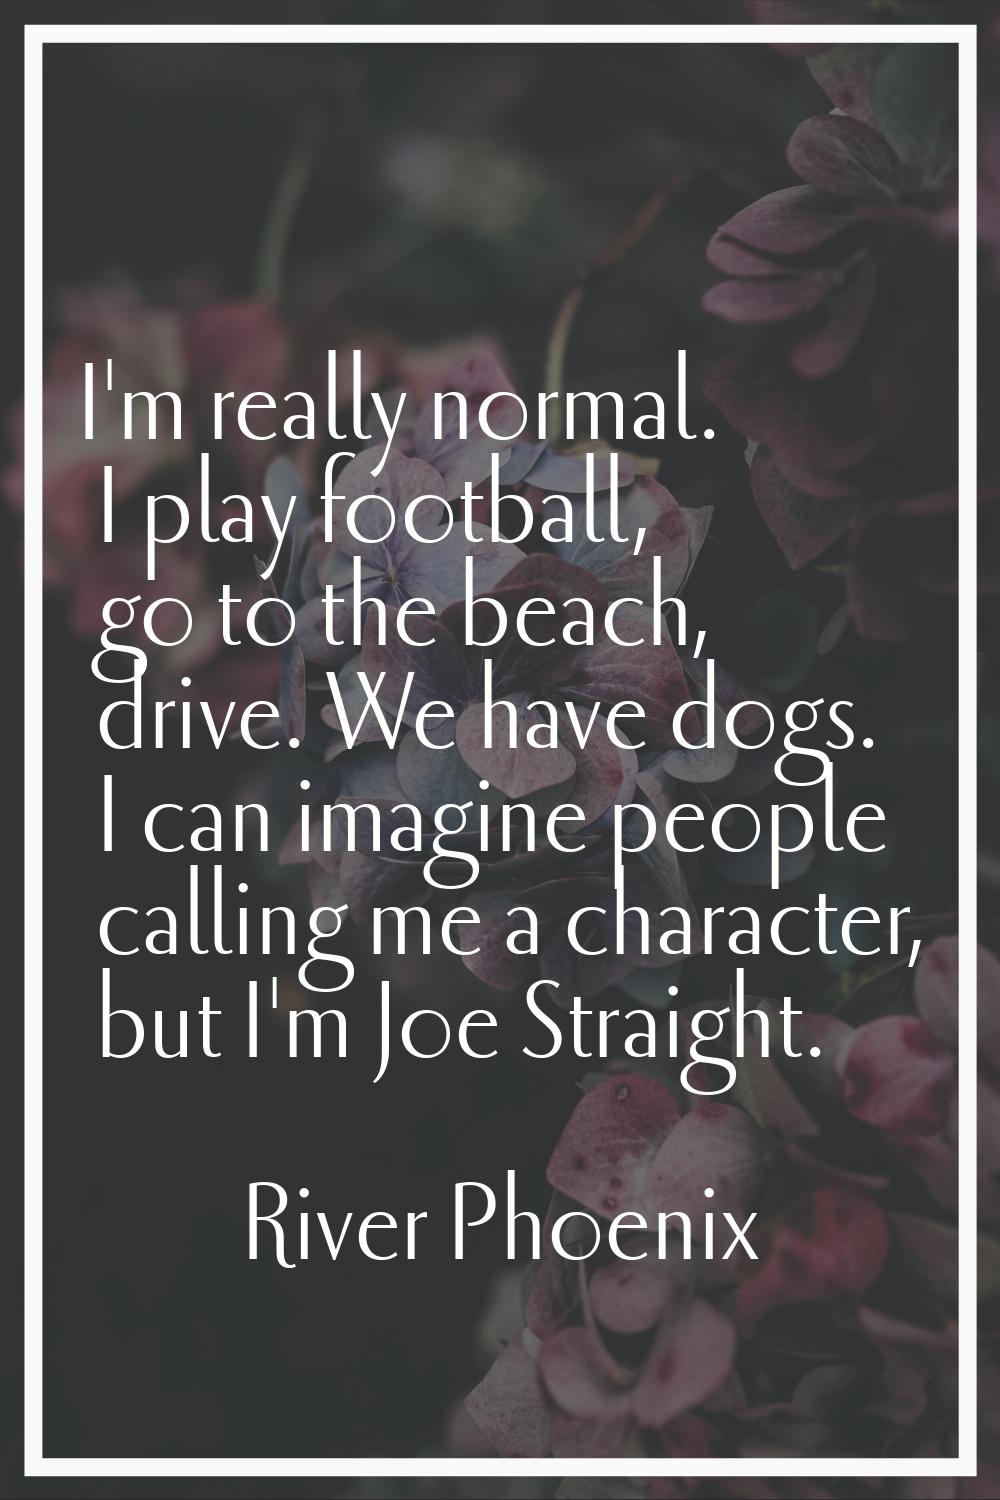 I'm really normal. I play football, go to the beach, drive. We have dogs. I can imagine people call